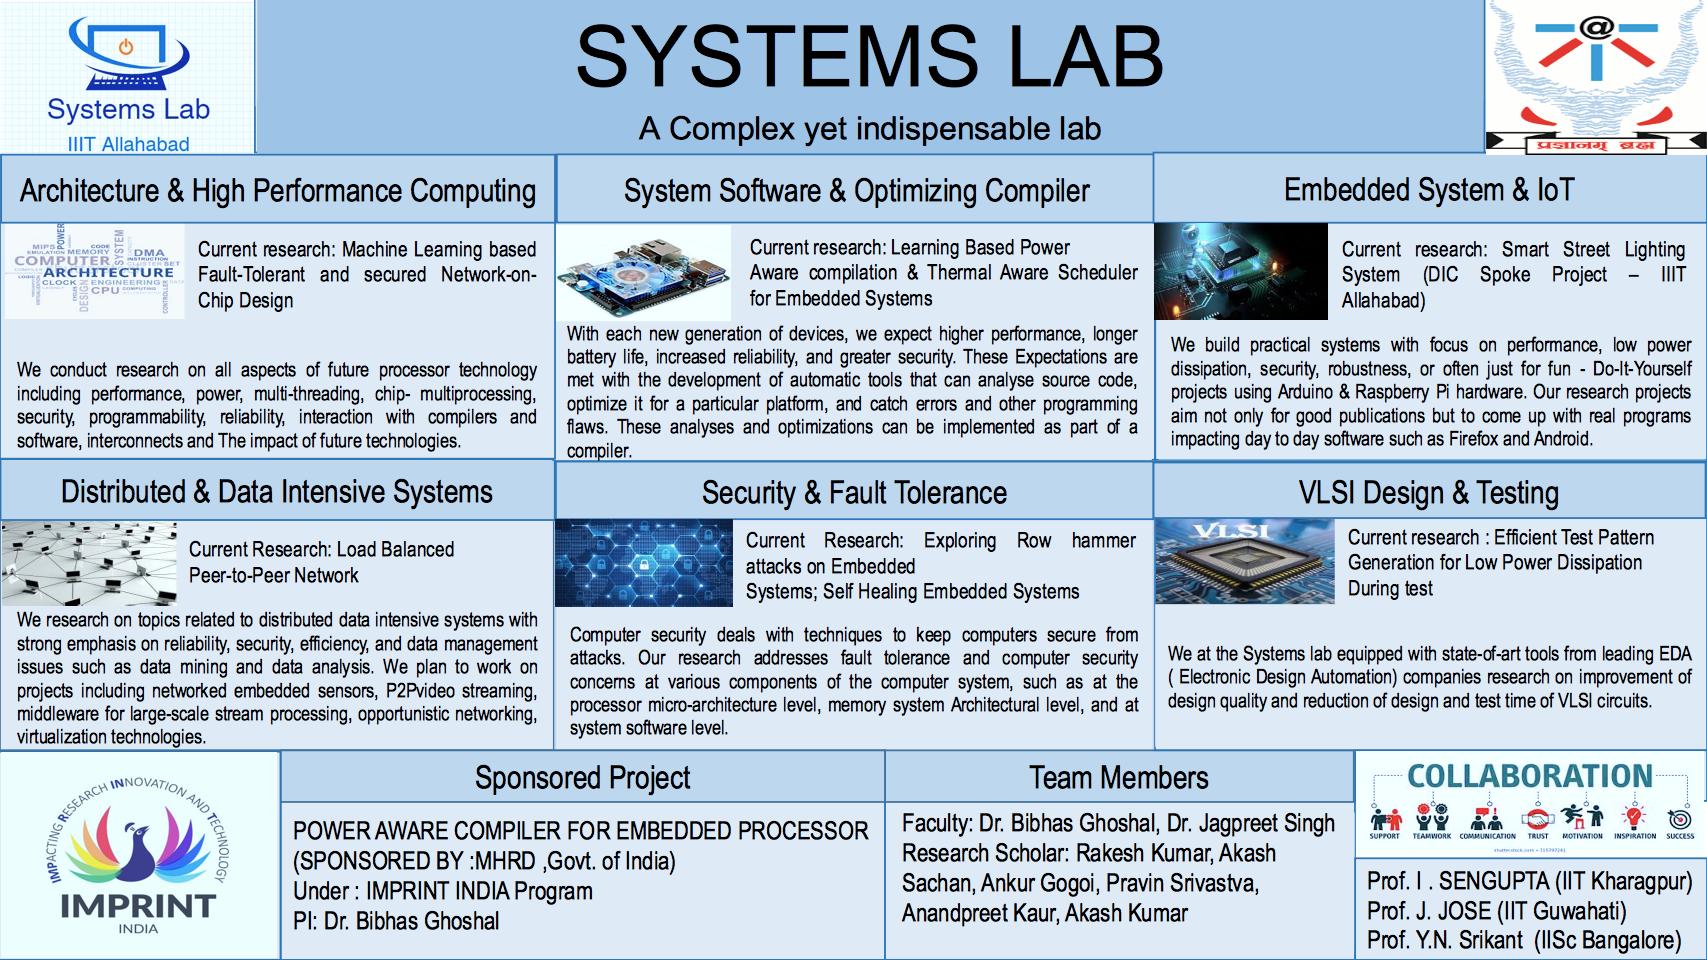 Systems Lab